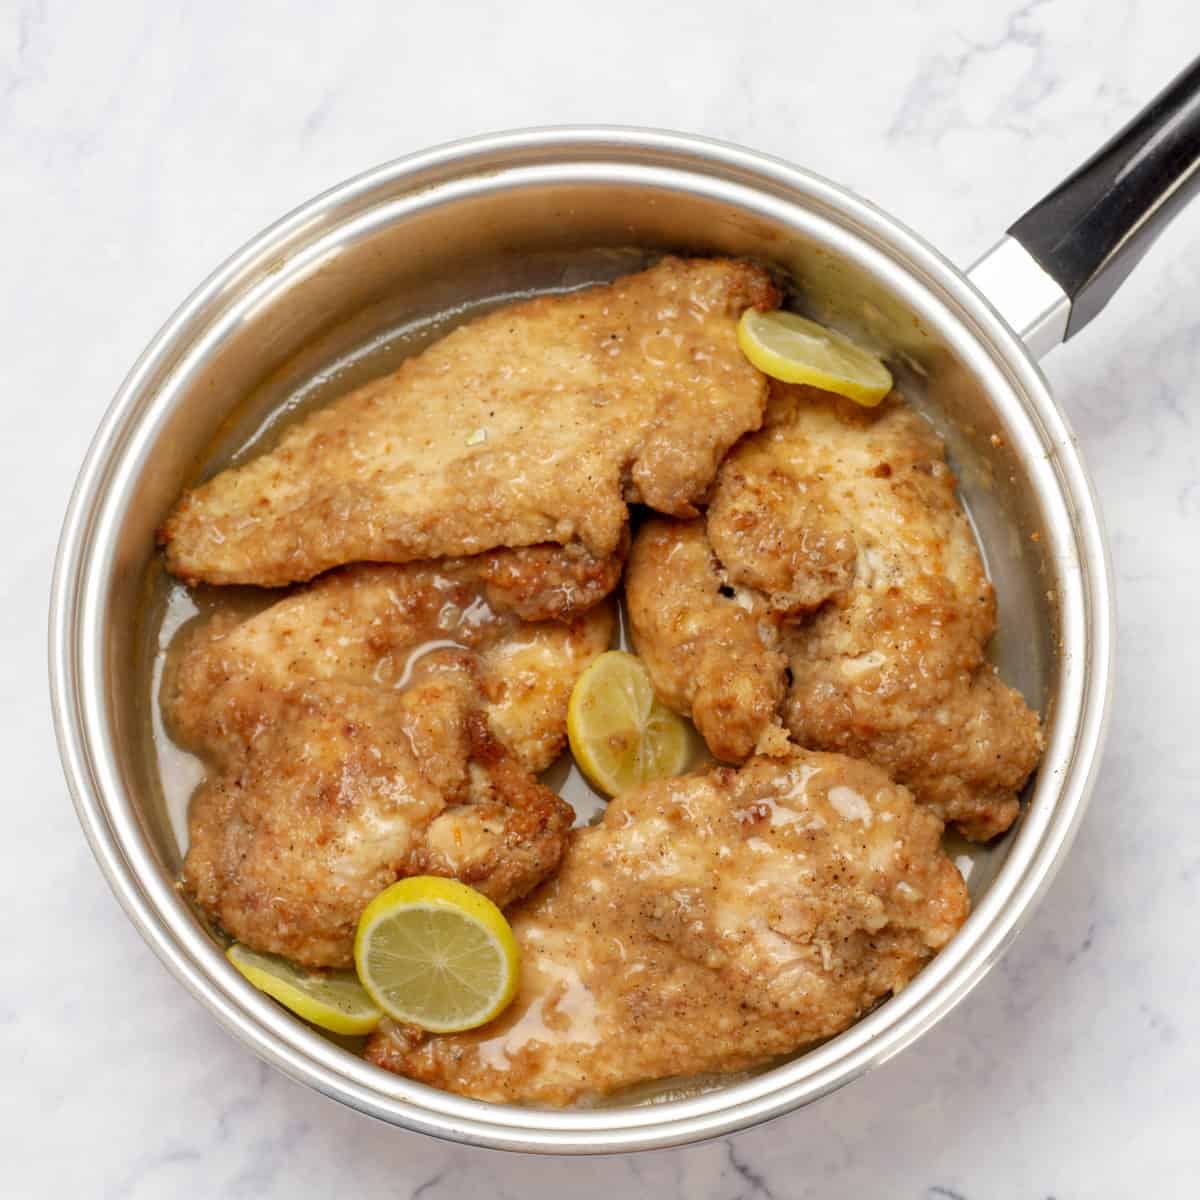 Chicken Francese cooking in a hot pan with lemon slices.